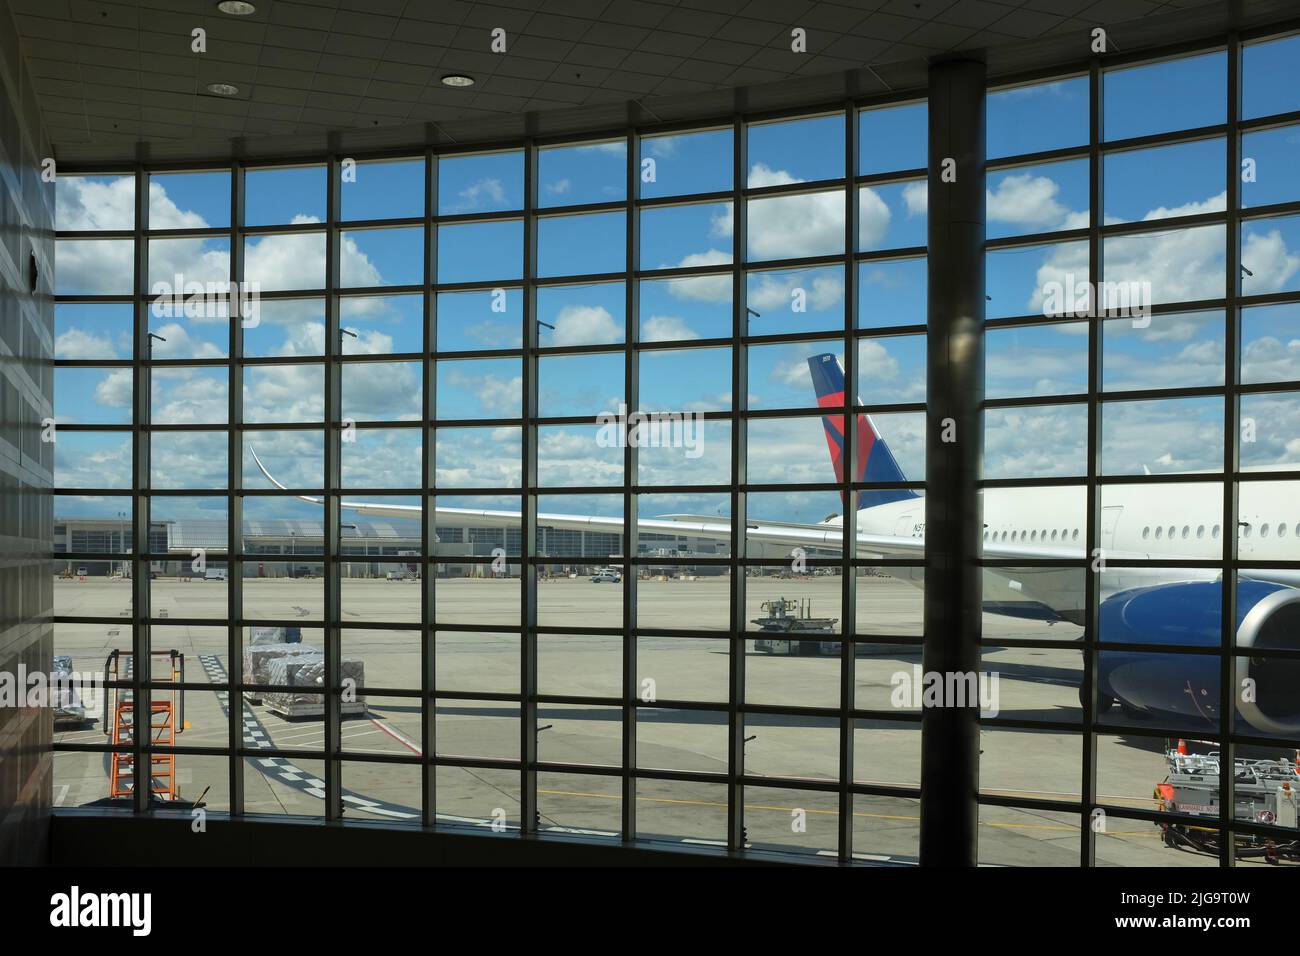 DETROIT, MICHIGAN - 22 JUN. 2021: Window and plane at the Detroit Metropolitan Wayne County Airport (DTW) a major international airport in the United Stock Photo